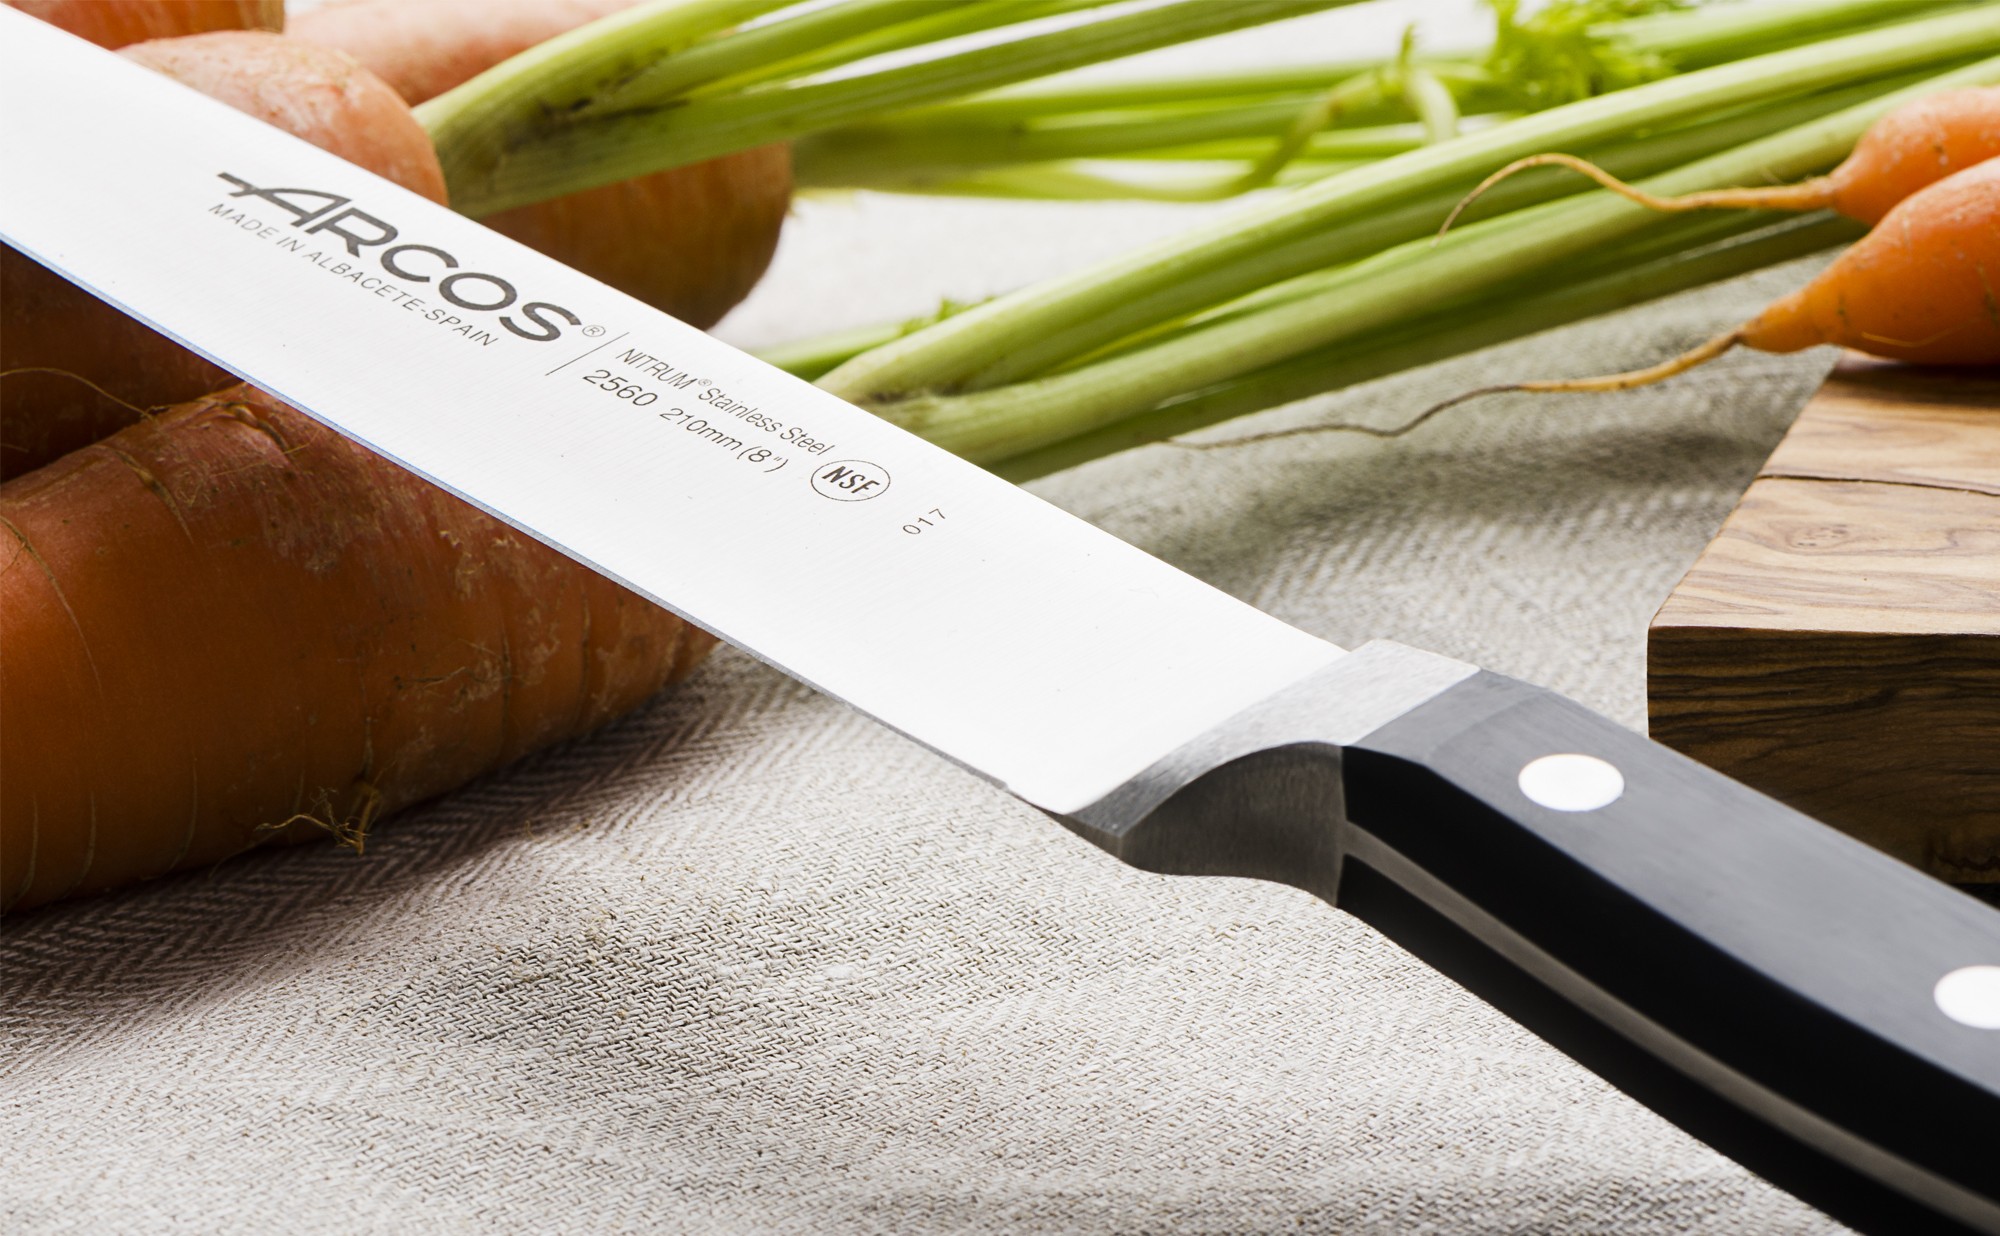 Forged Cutting Knife buy here, Arcos